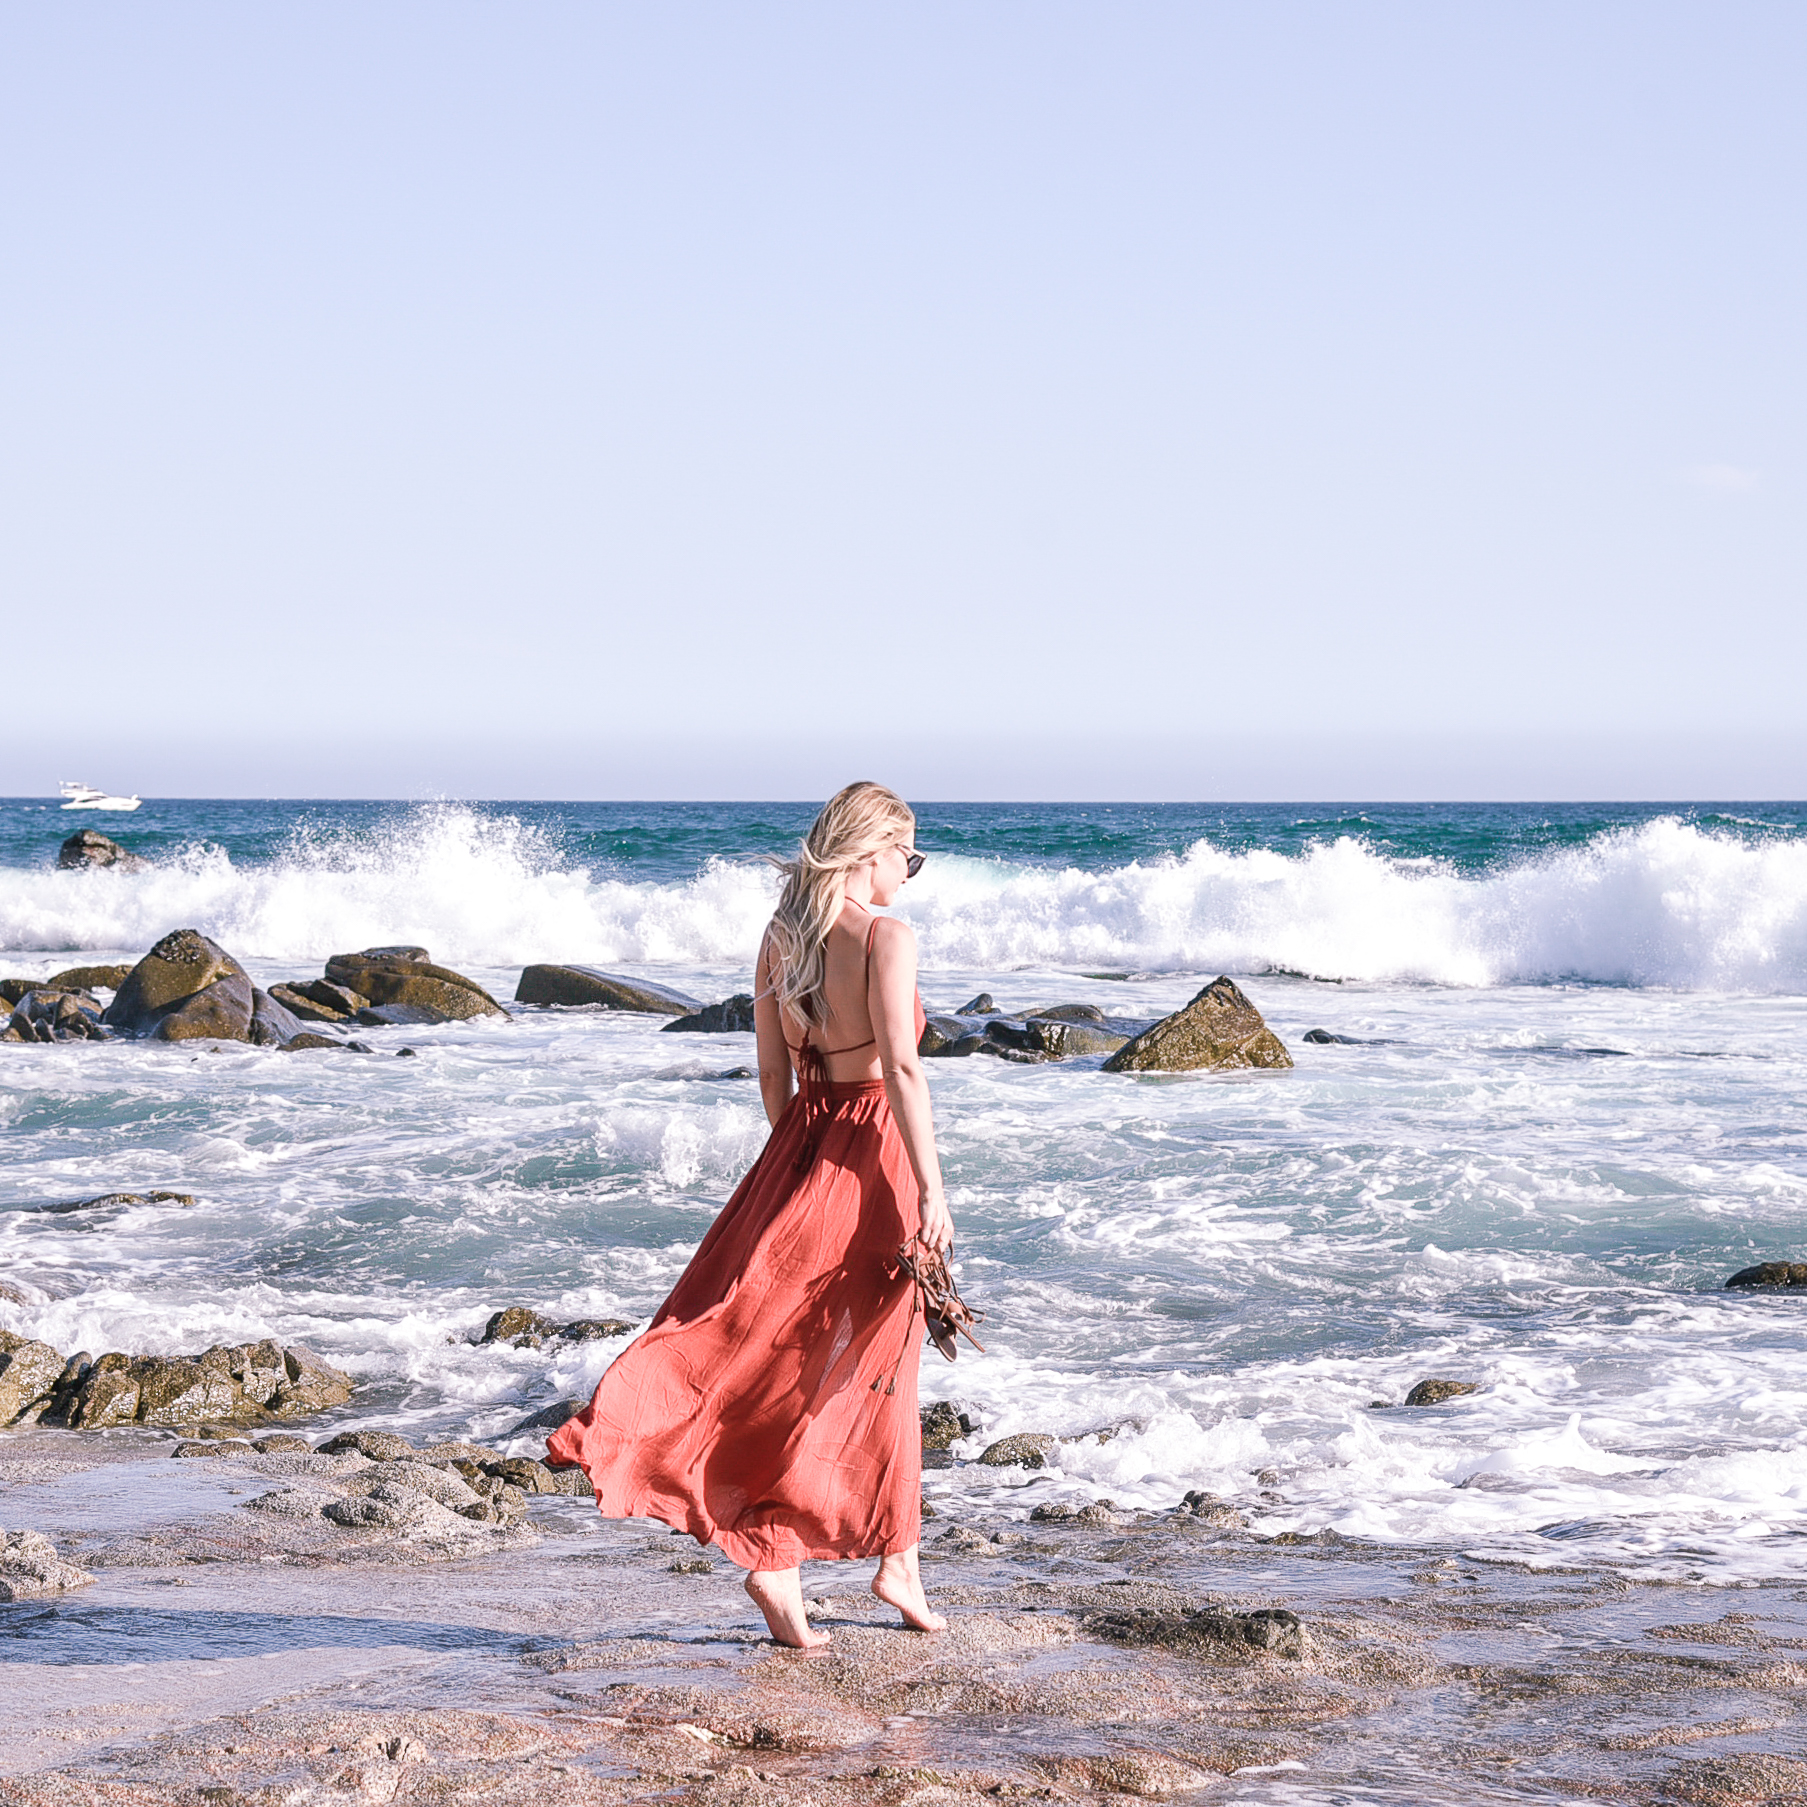 Jenna Colgrove on the beach in Cabo San Lucas, Mexico in a red maxi dress.